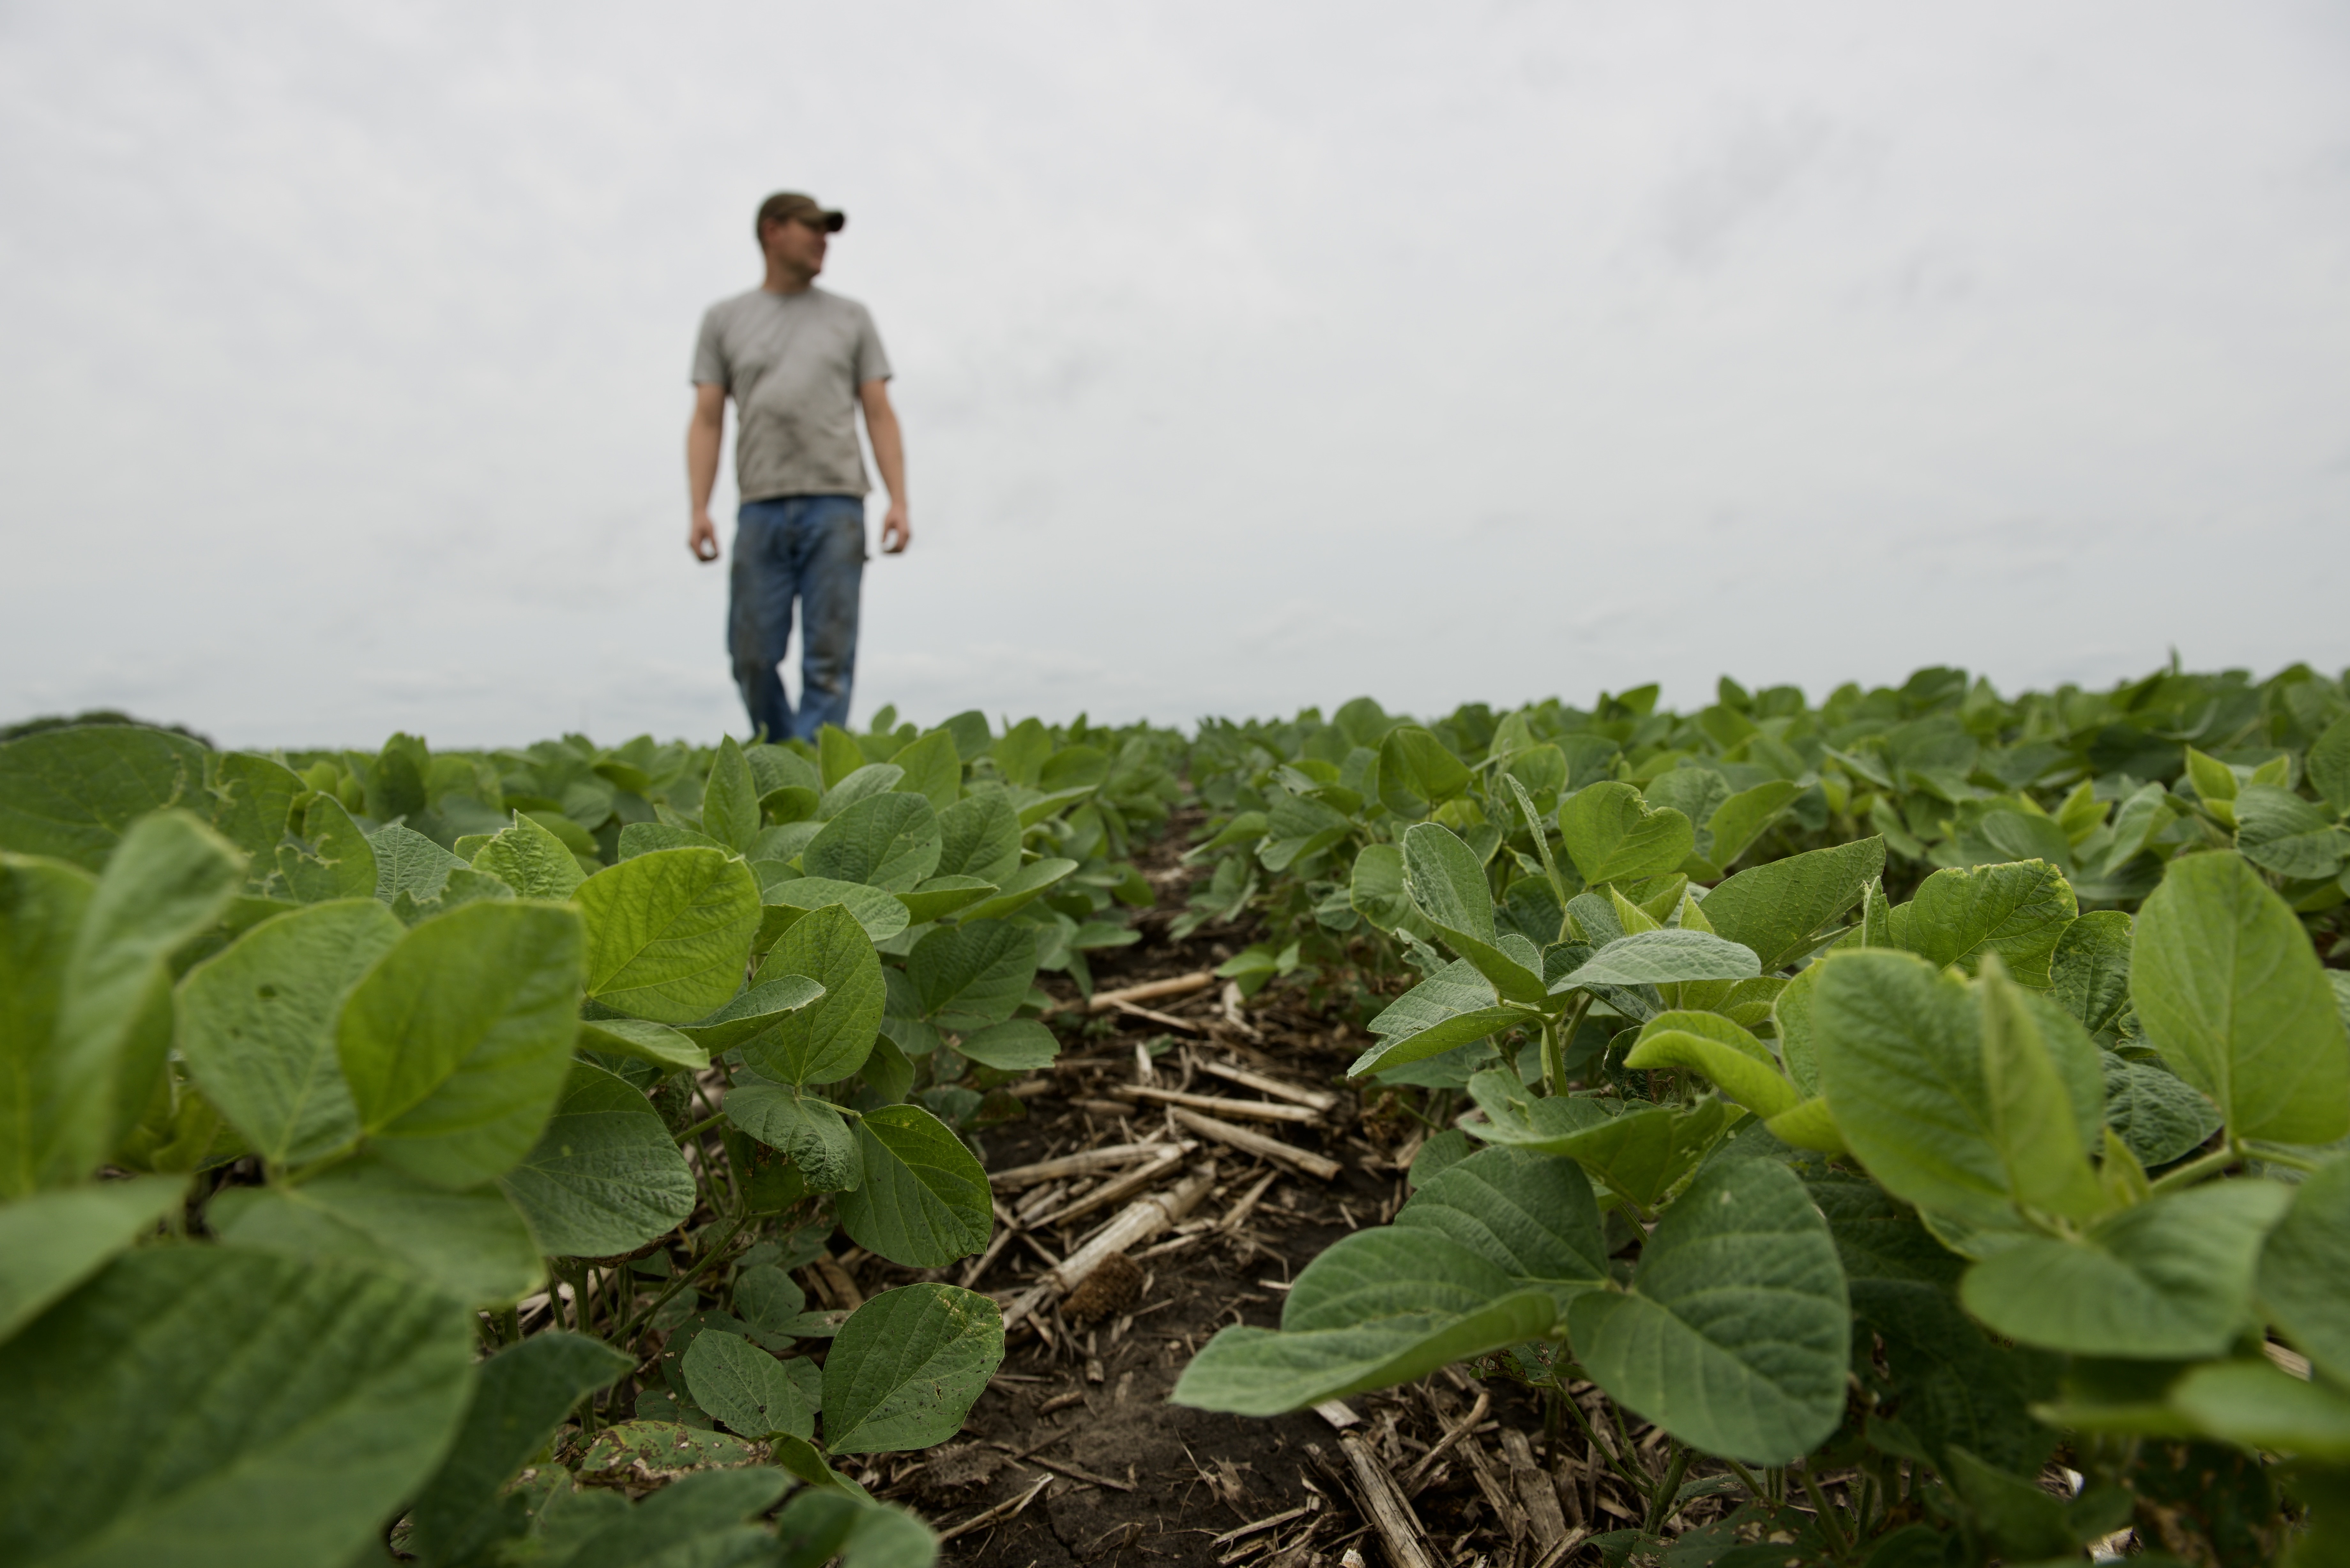 A farmer scouts a soybean field for weed and pest press